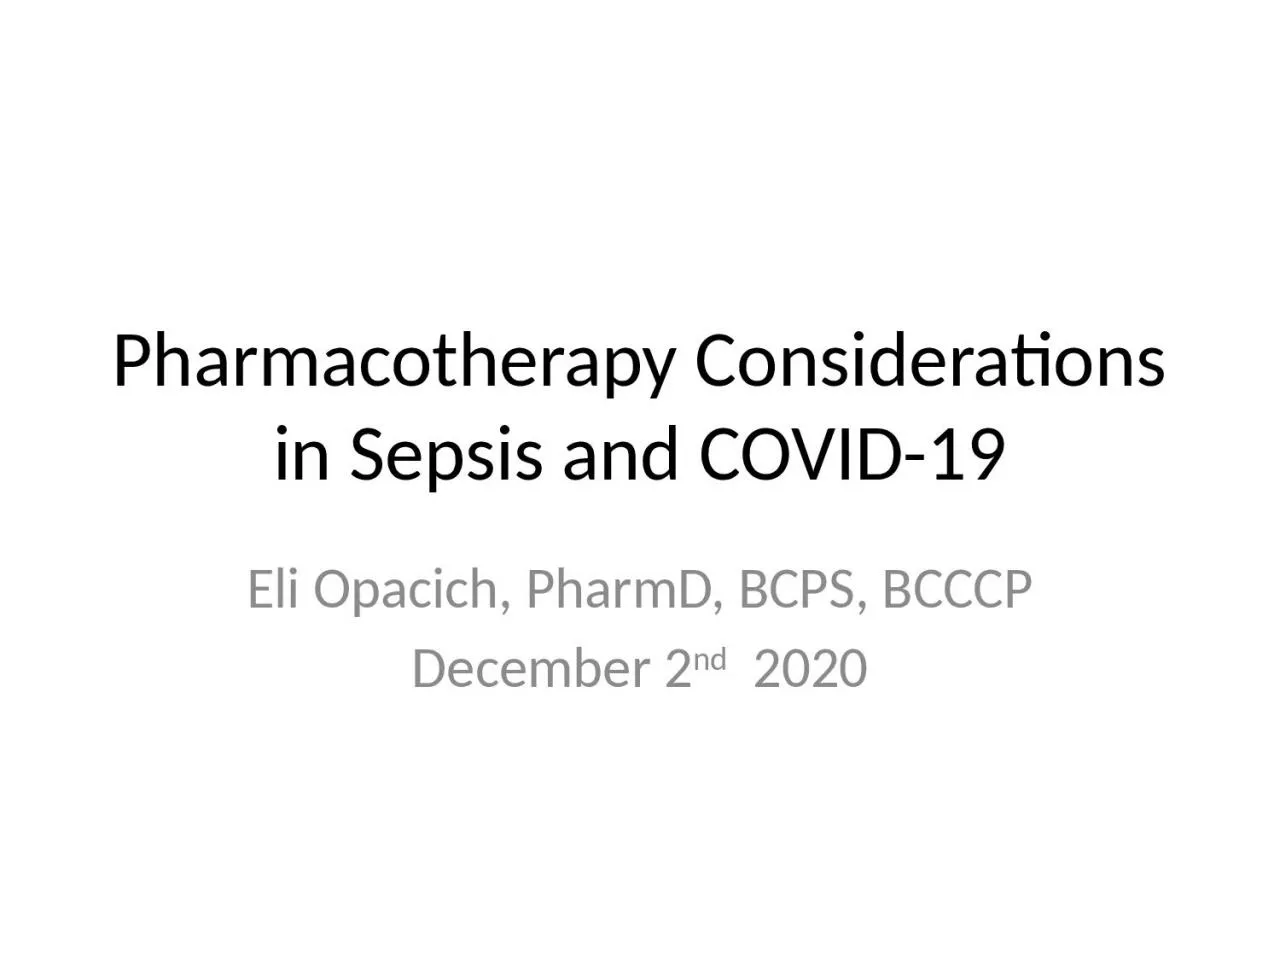 Pharmacotherapy Considerations in Sepsis and COVID-19